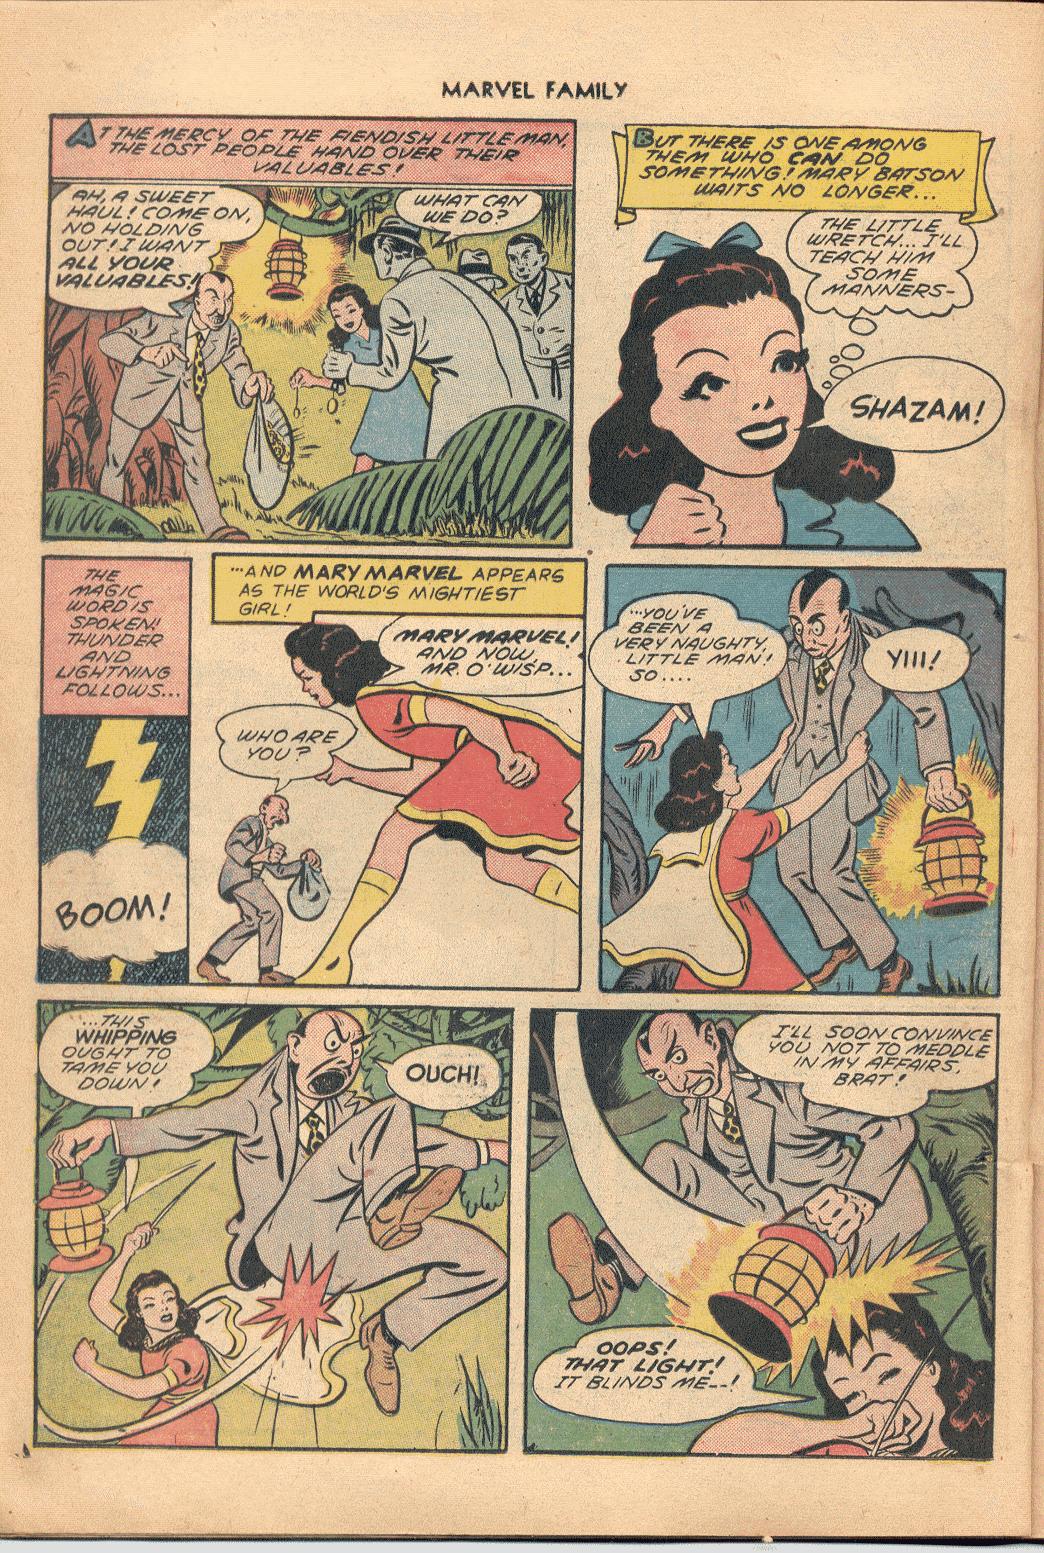 spanking page with Mary Marvel and Will